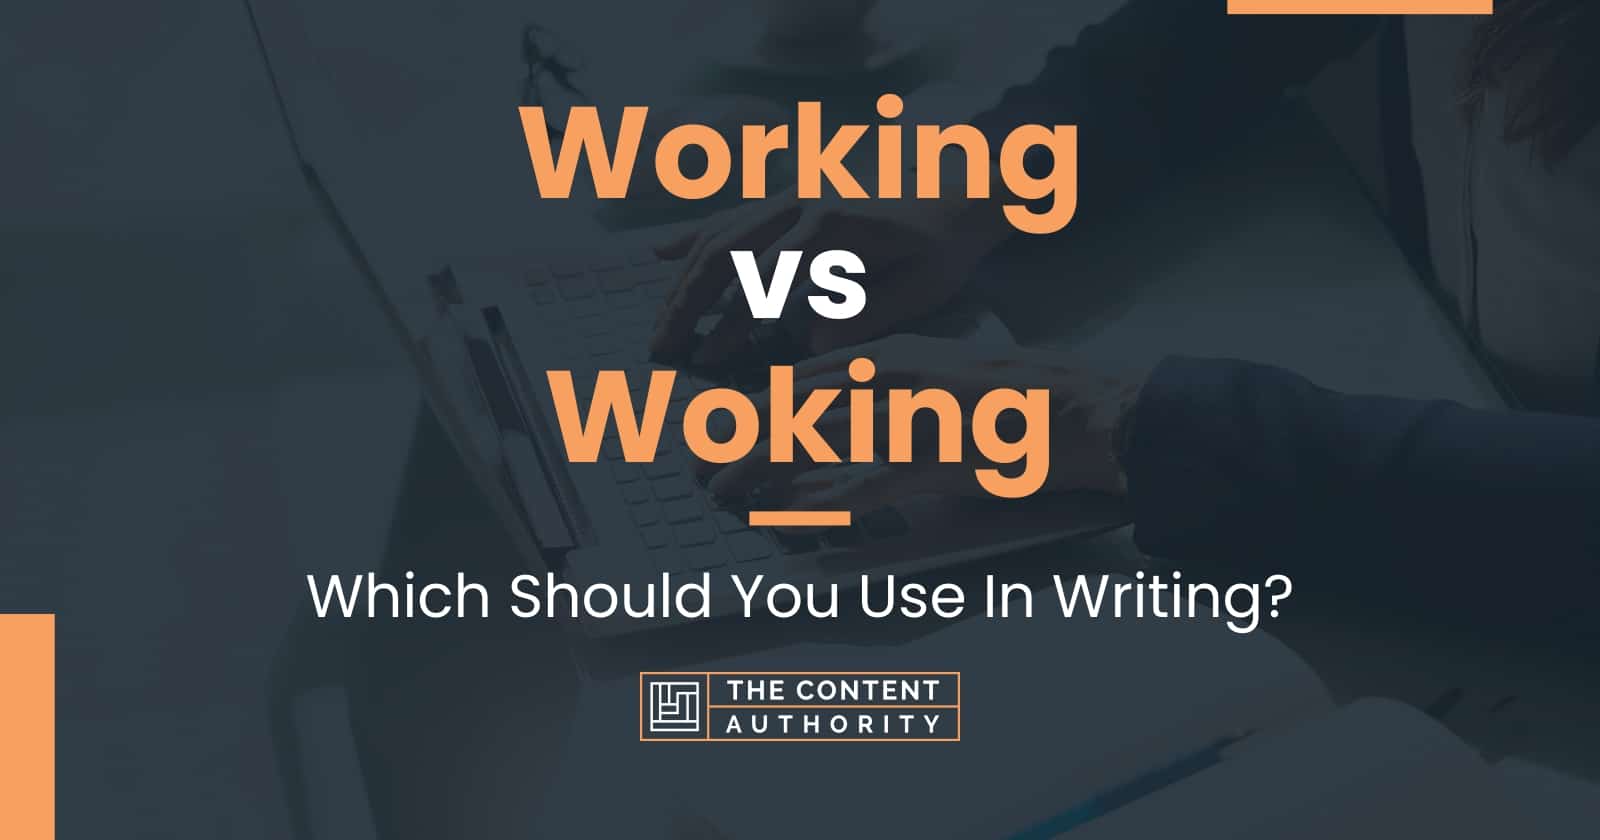 Working vs Woking: Which Should You Use In Writing?